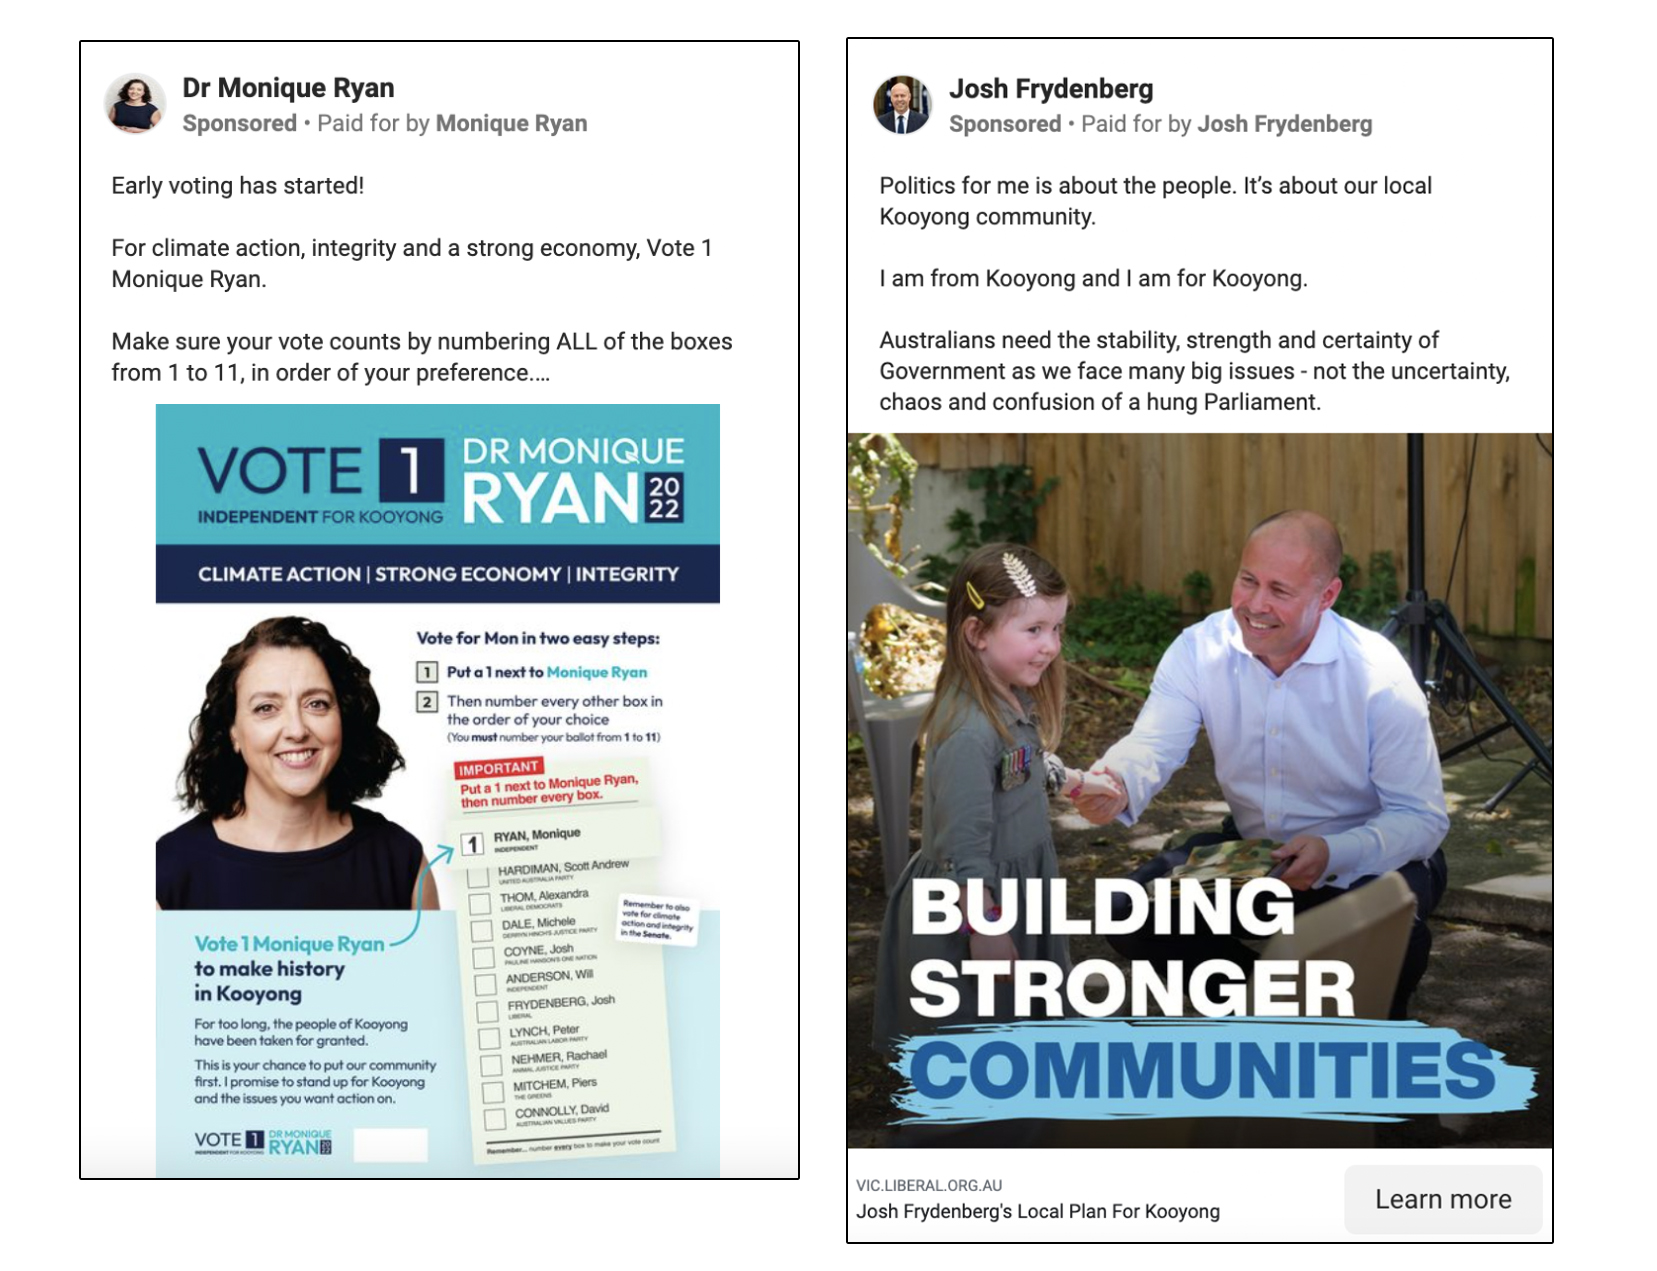 Two screenshots of Facebook ads by Monique Ryan (left) and Josh Frydenberg (right). Each features a picture of them